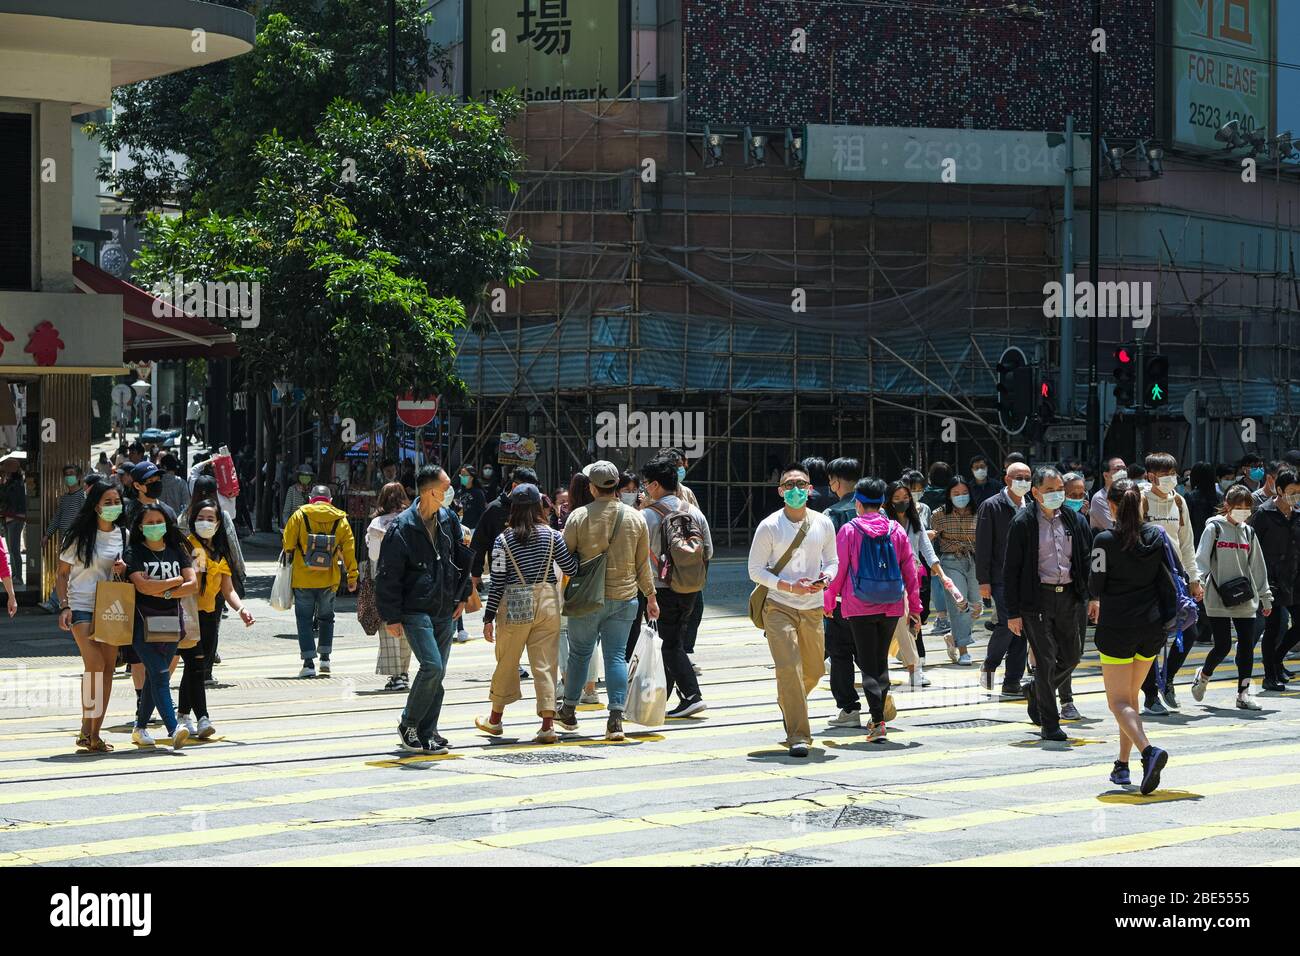 Hong Kong, China. 12th Apr, 2020. People wear surgical face mask as they cross the street. Corona Virus (Covid19) cases in Hong Kong have reached over 1,000 on Saturday as authorities urged the public to stay at home during the long Easter weekend. Credit: Keith Tsuji/ZUMA Wire/Alamy Live News Stock Photo